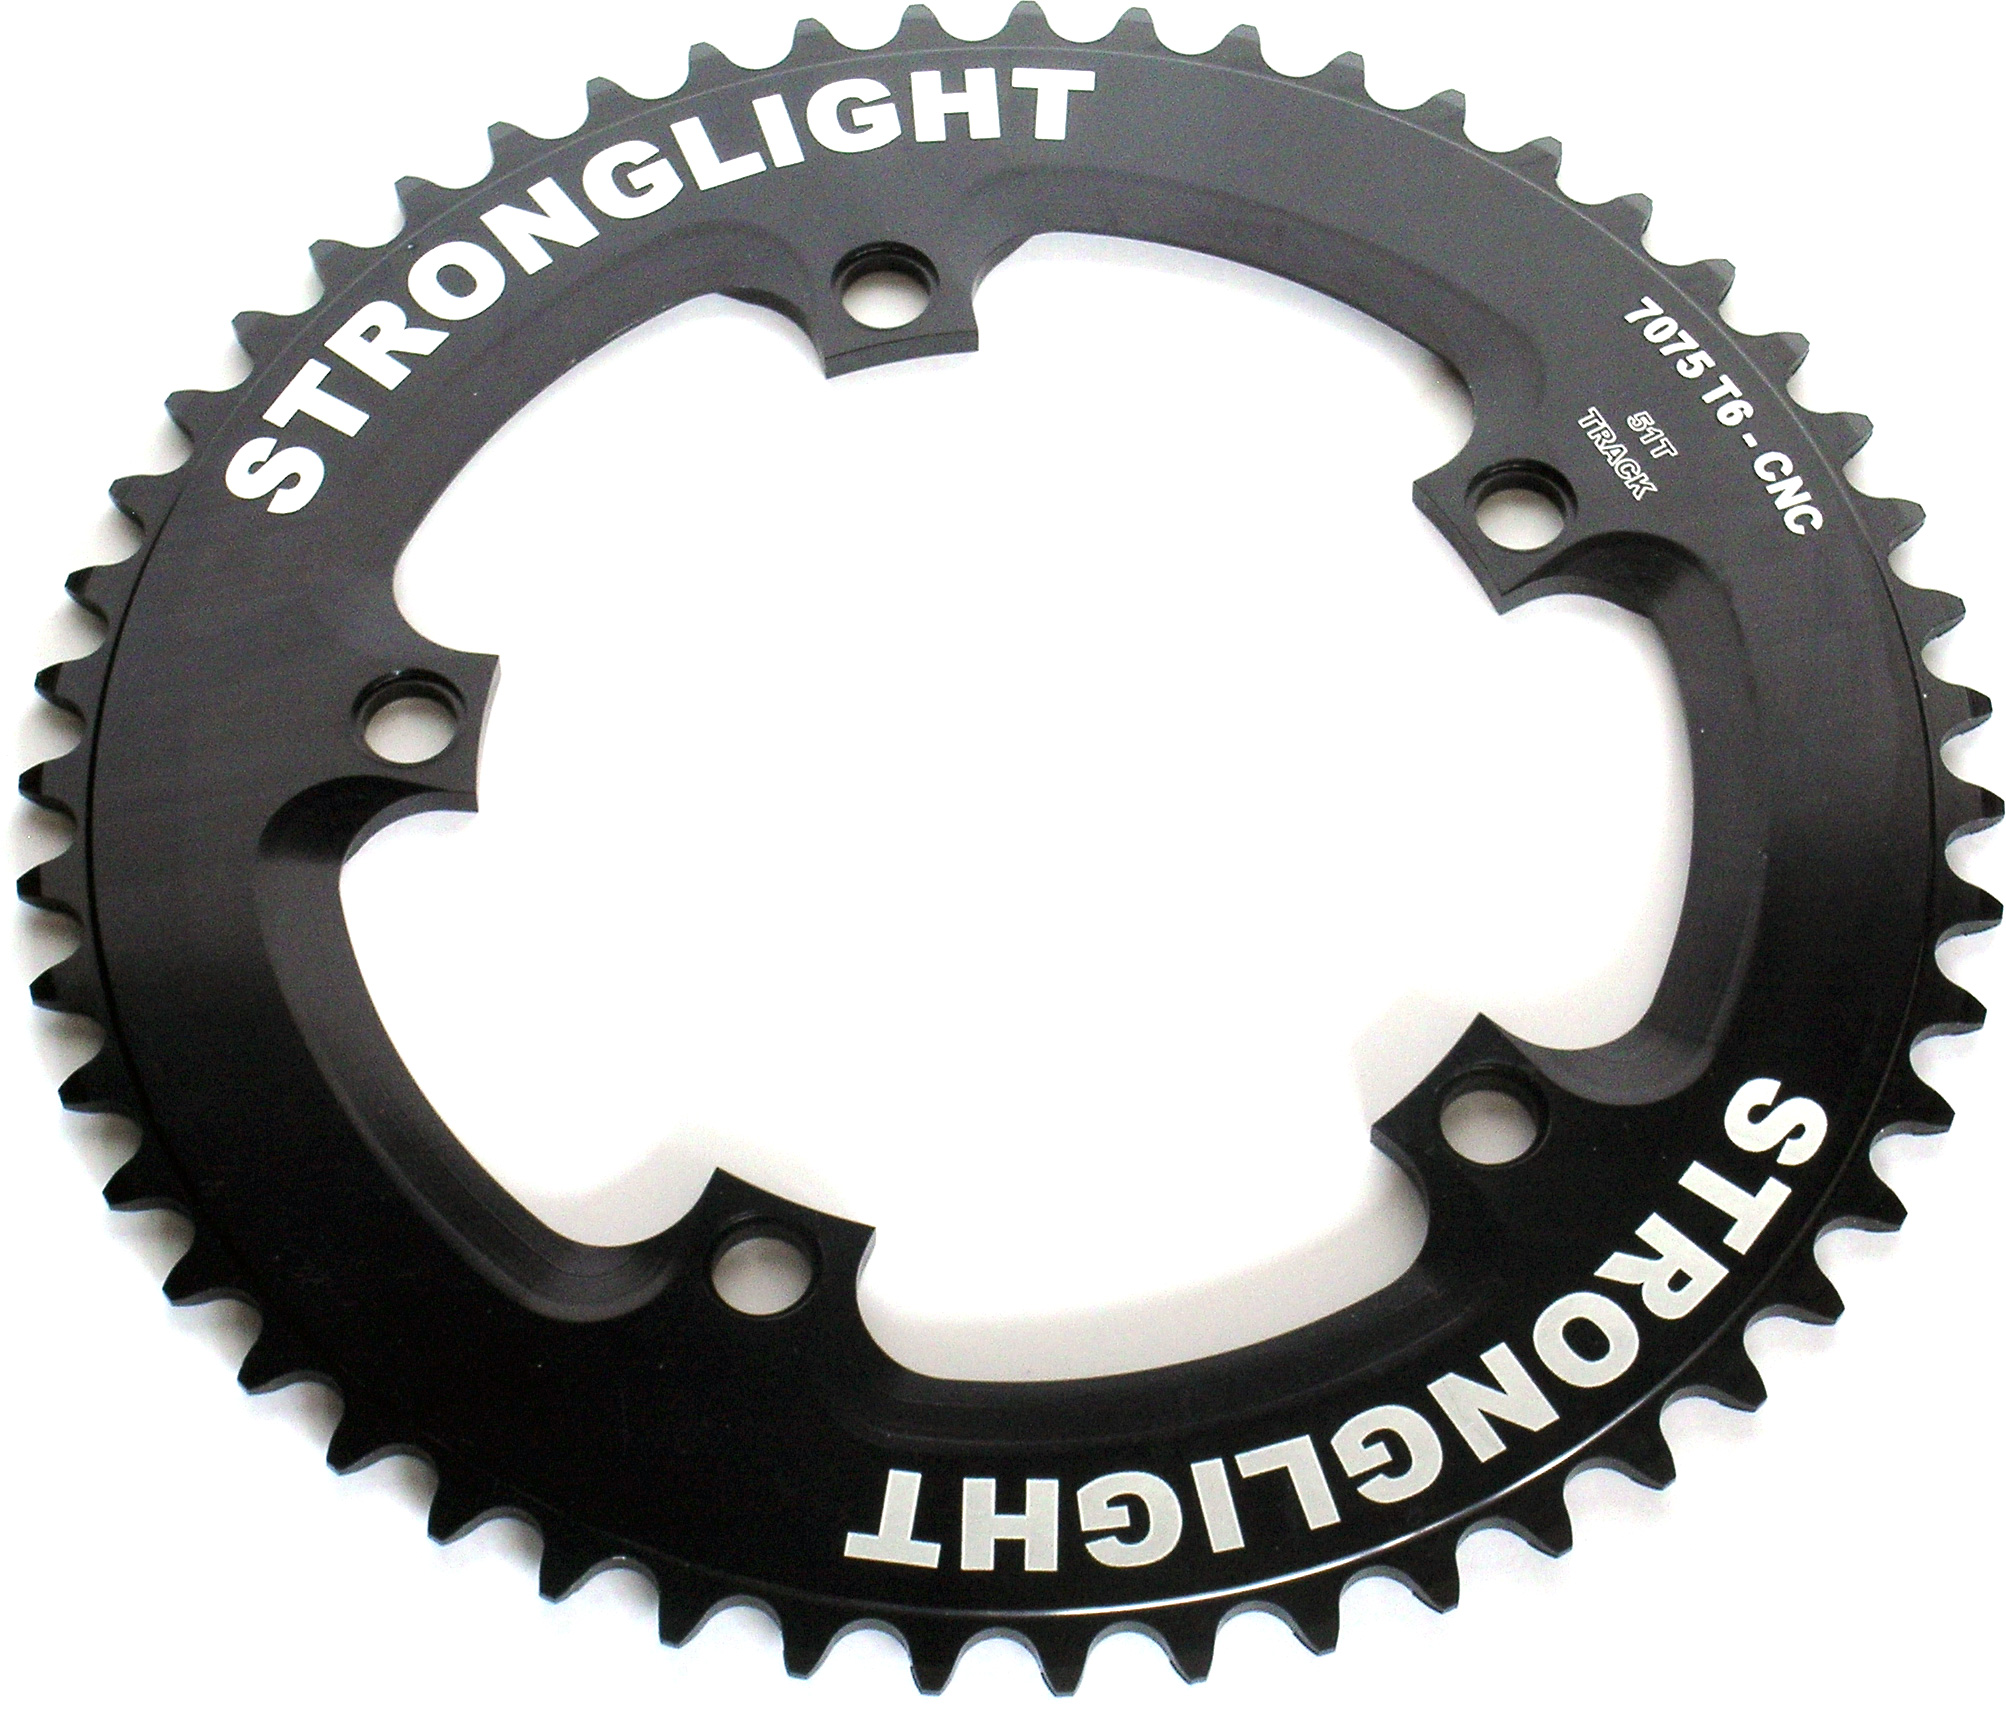 RT130Z52 Stronglight Black 52T 5-Arm/130mm Track Chainring